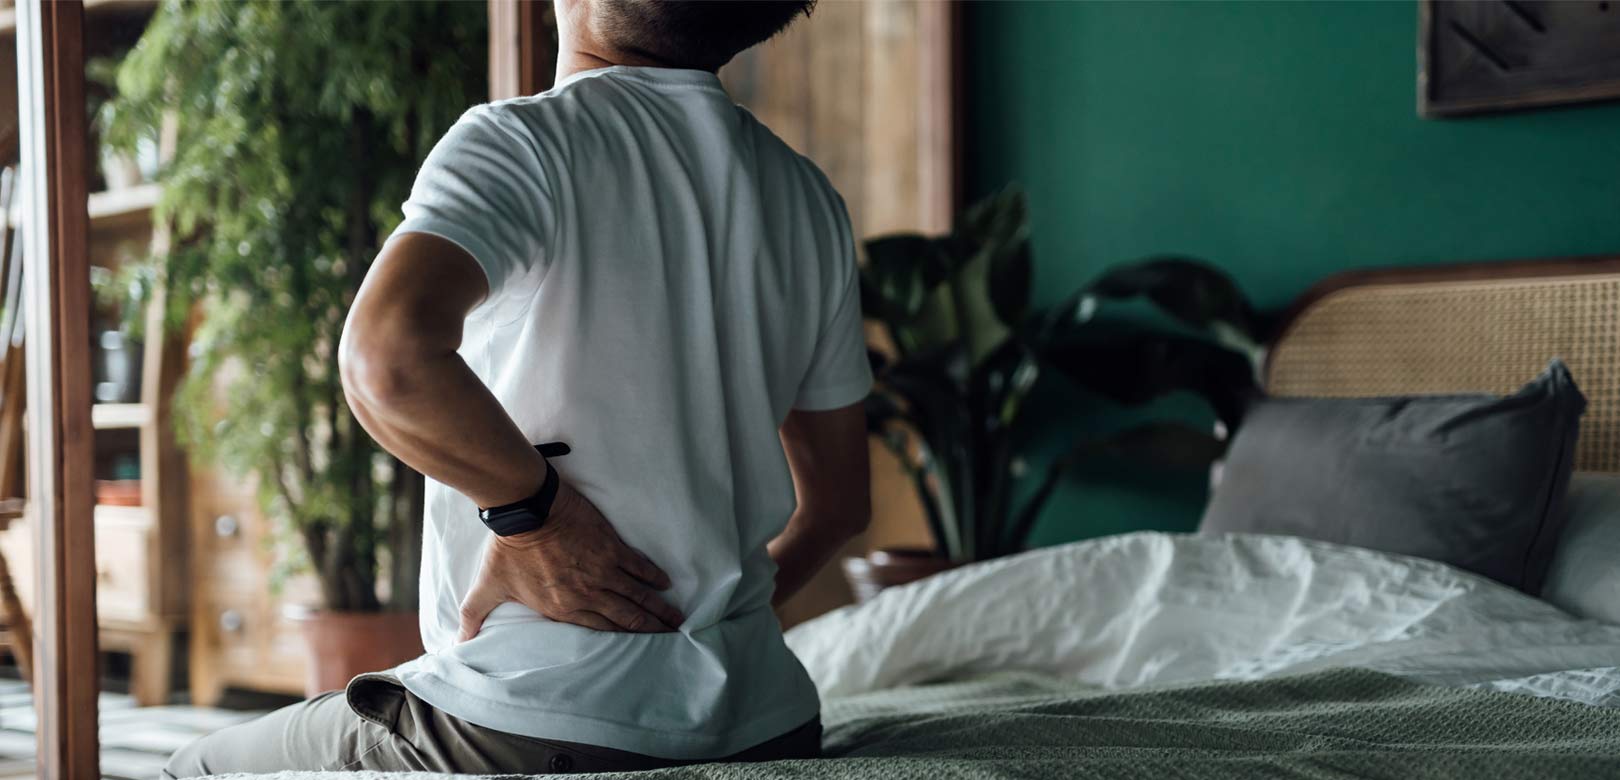 Tips to help with back pain